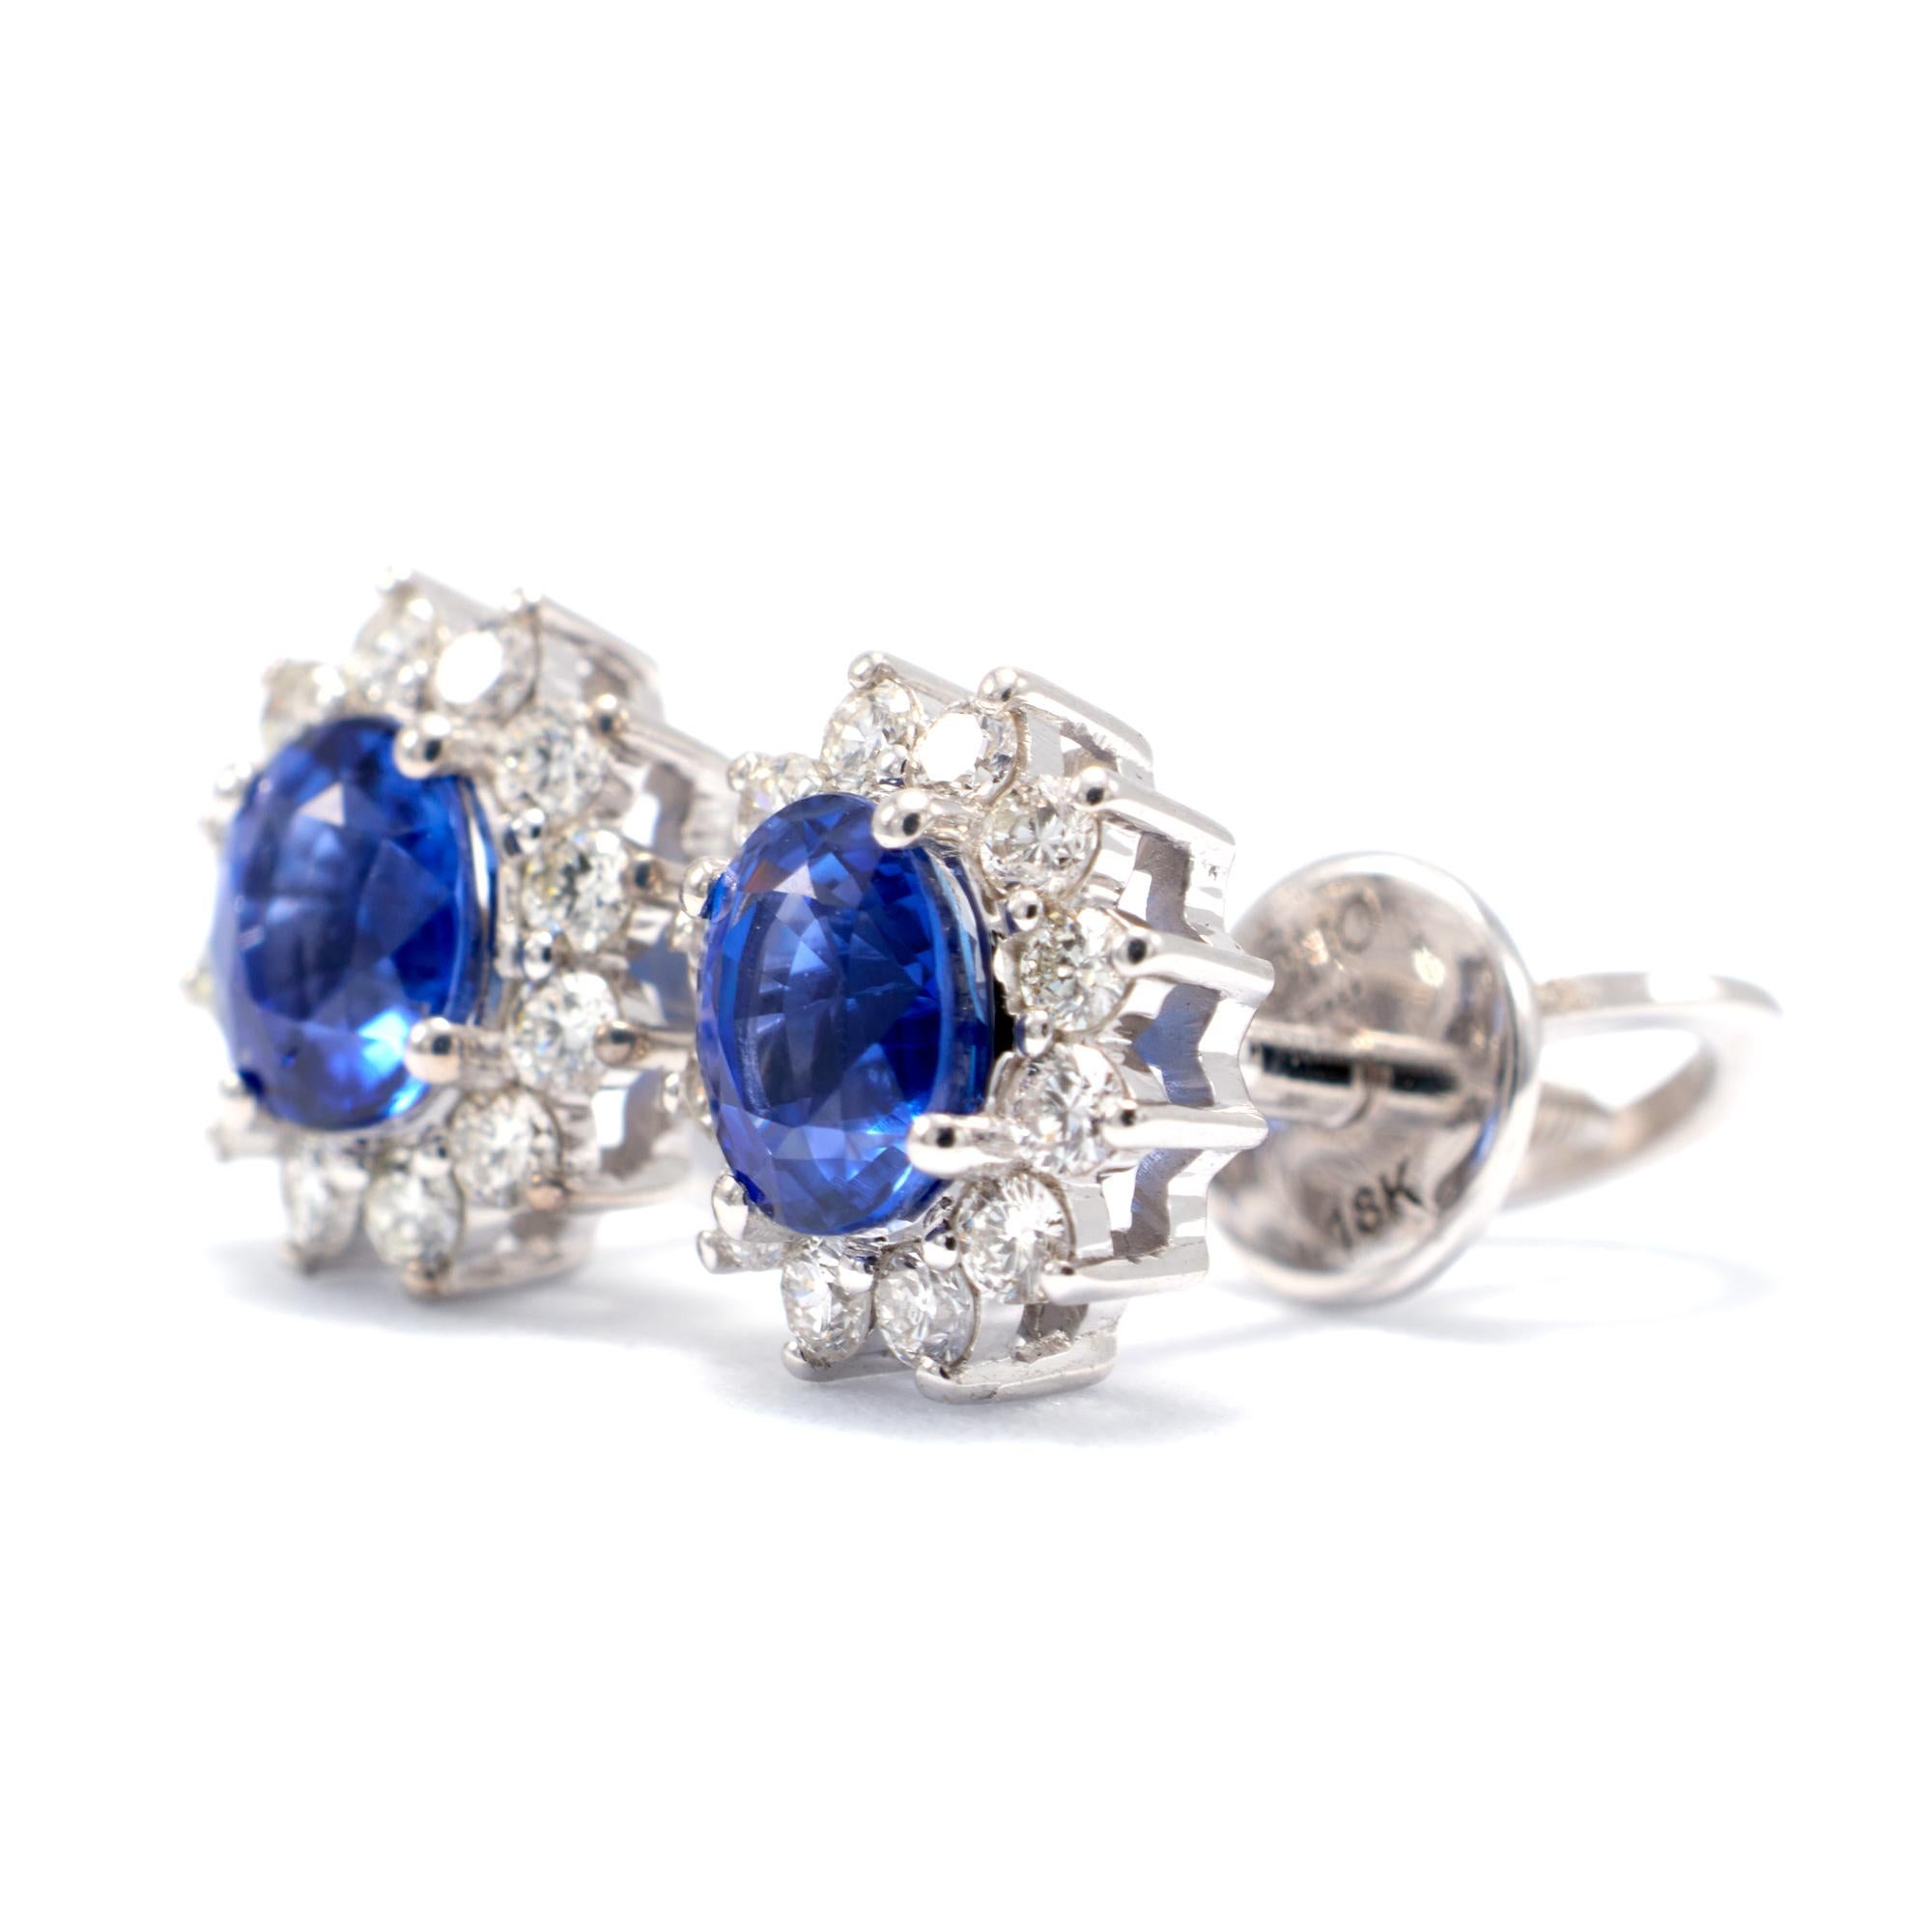 18k White Gold and Oval Cut Natural Royal Blue Sapphire surrounded by a halo of natural diamonds in a prong and basket setting

These regal blue sapphire and diamond stud earrings are fit for a queen. The deep blue sapphires are surrounded by a halo